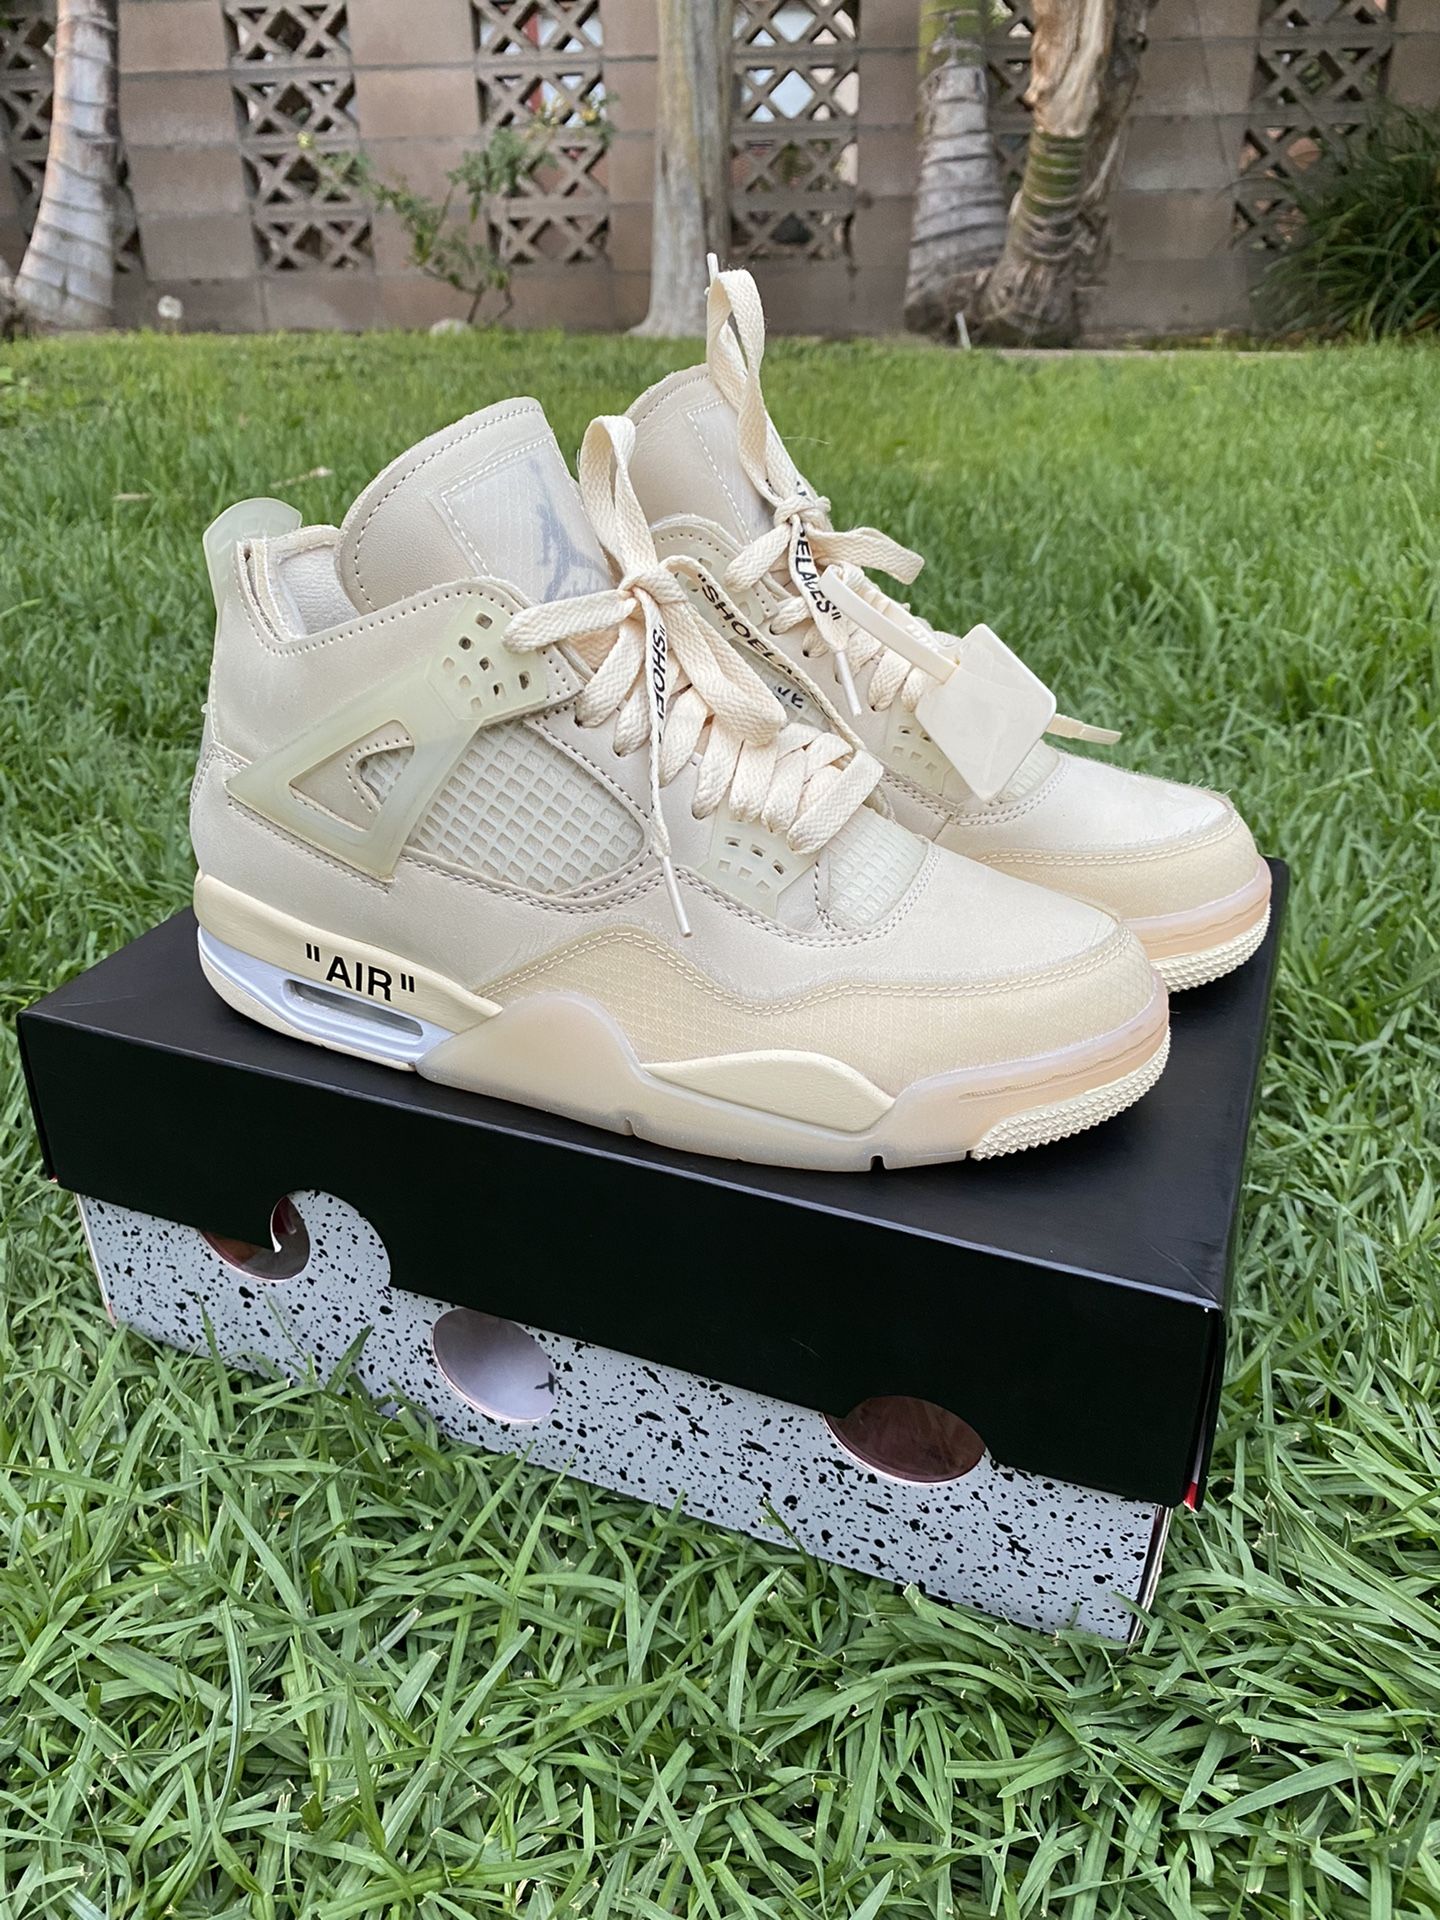 Nike Air Jordan 5 Retro SP Off White Grey Sail Size 9.5 for Sale in San  Diego, CA - OfferUp